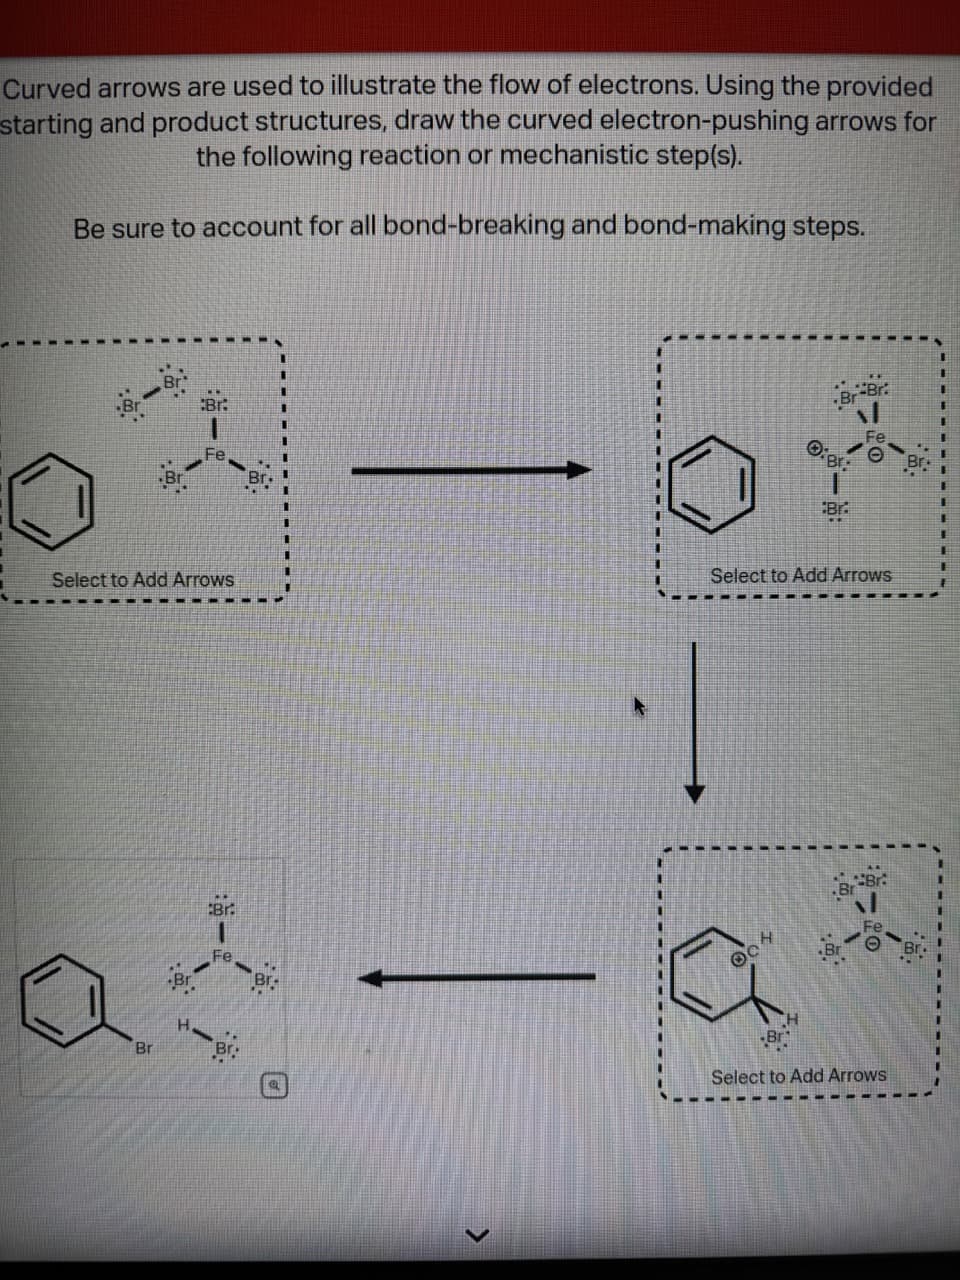 Curved arrows are used to illustrate the flow of electrons. Using the provided
starting and product structures, draw the curved electron-pushing arrows for
the following reaction or mechanistic step(s).
Be sure to account for all bond-breaking and bond-making steps.
Br:
Select to Add Arrows
Br.
Fe
at
Br
Br
·1
Br-Br
104
O:B:
Select to Add Arrows
Br
Br-Br
Select to Add Arrows